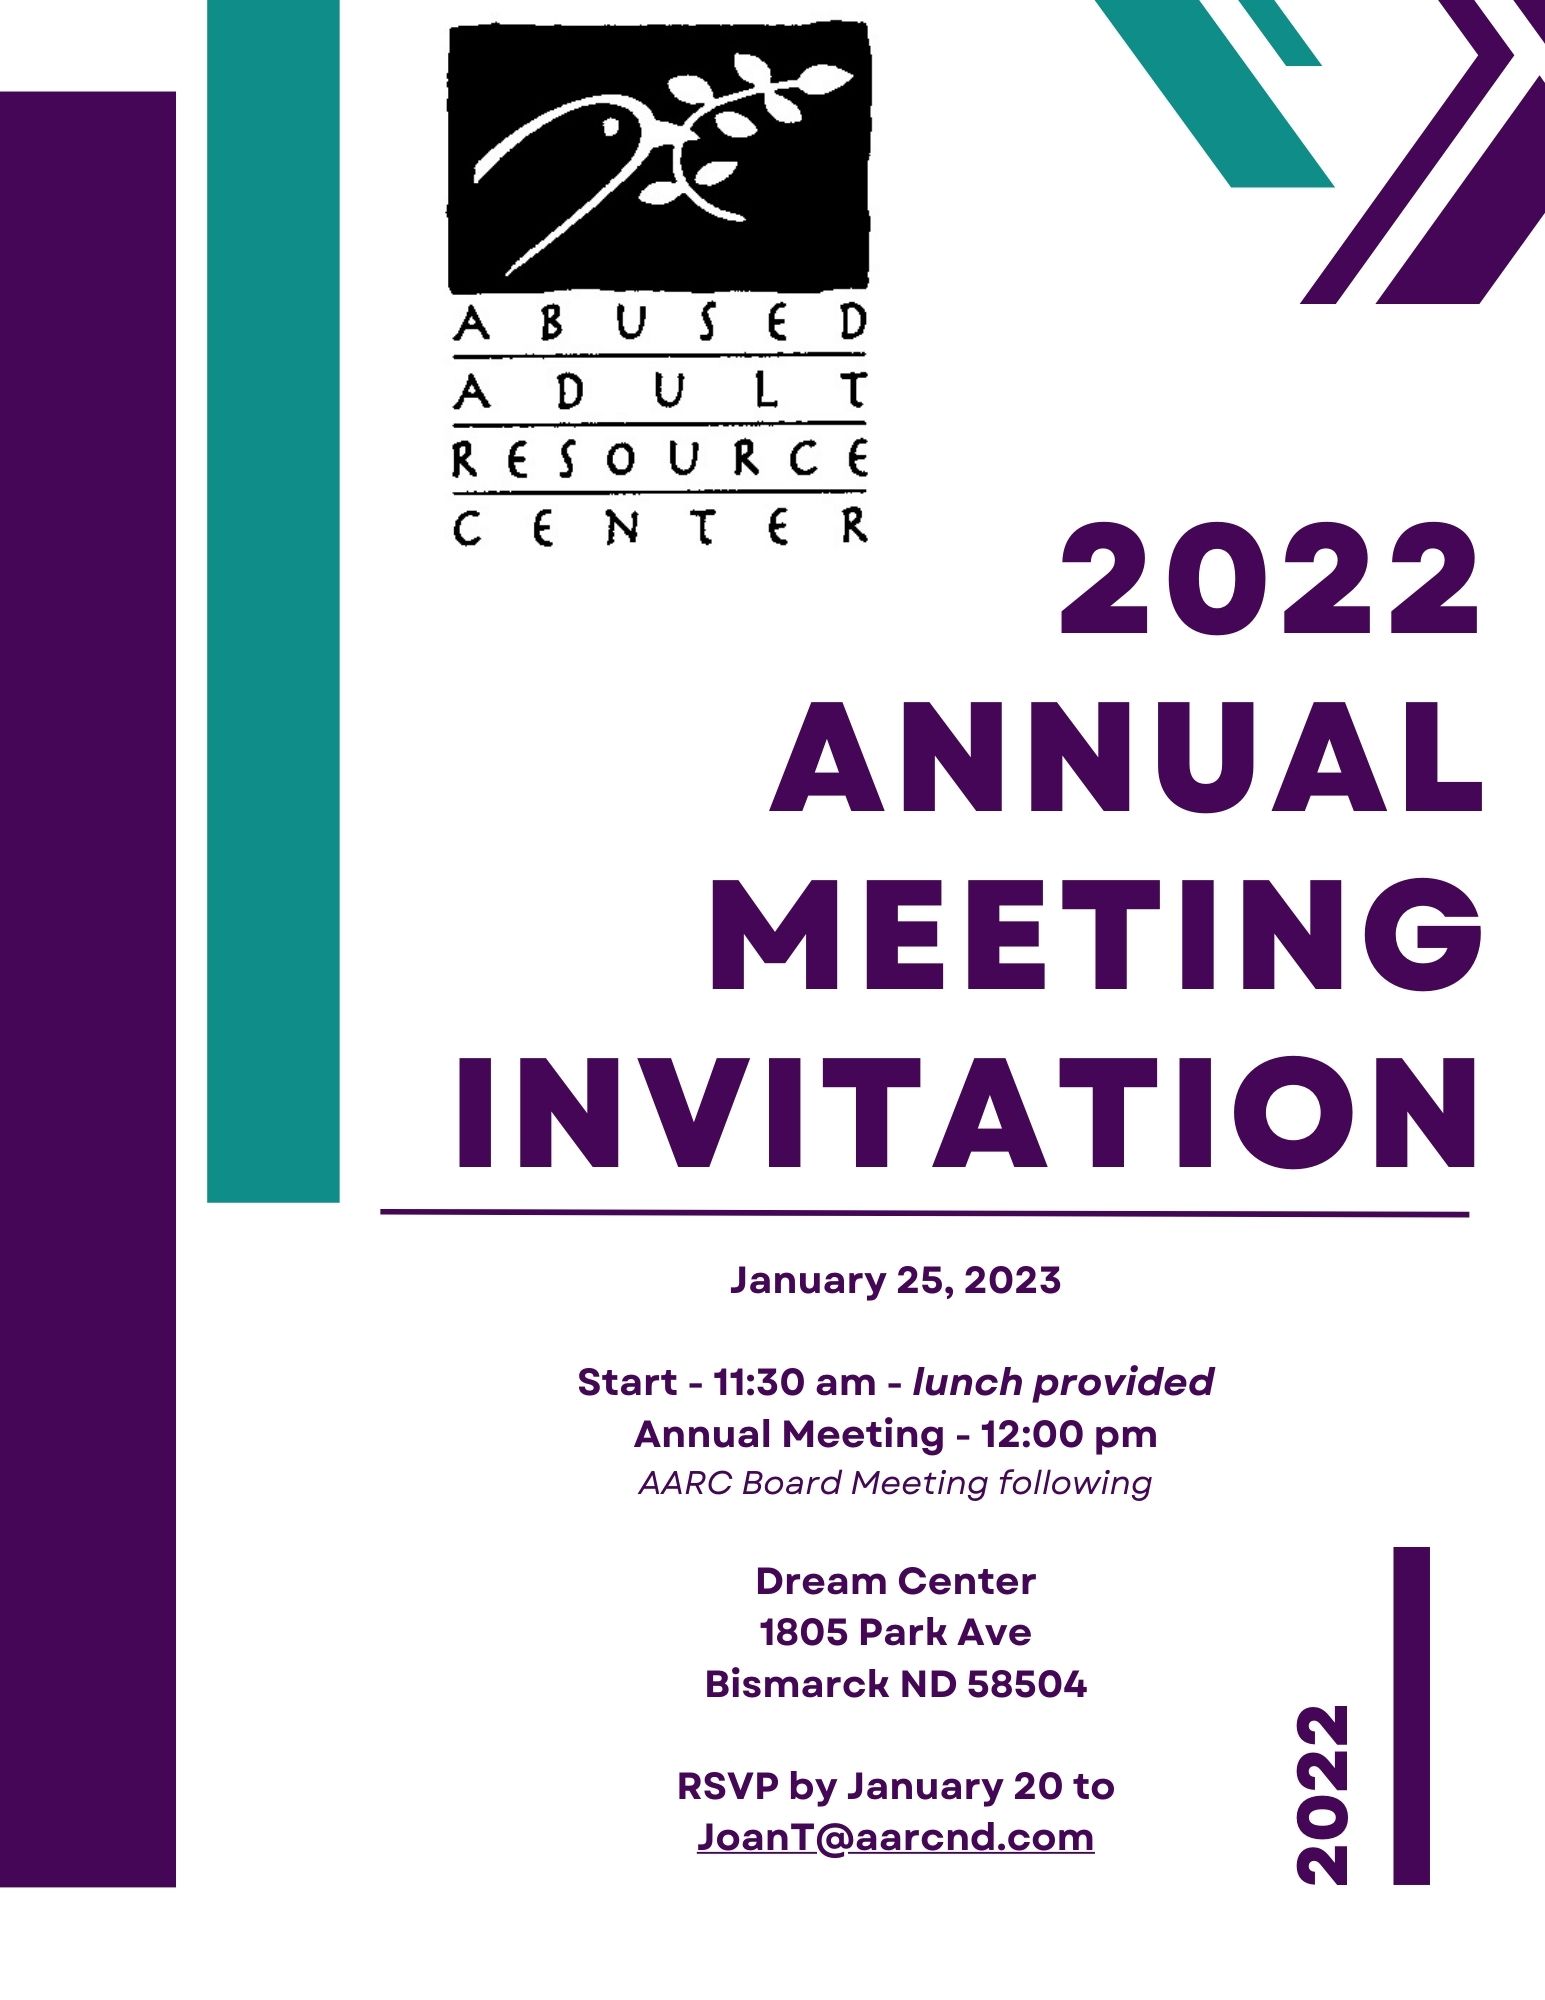 Abused Adult Resource Center 2022 Annual Meeting | Abused Adult ...